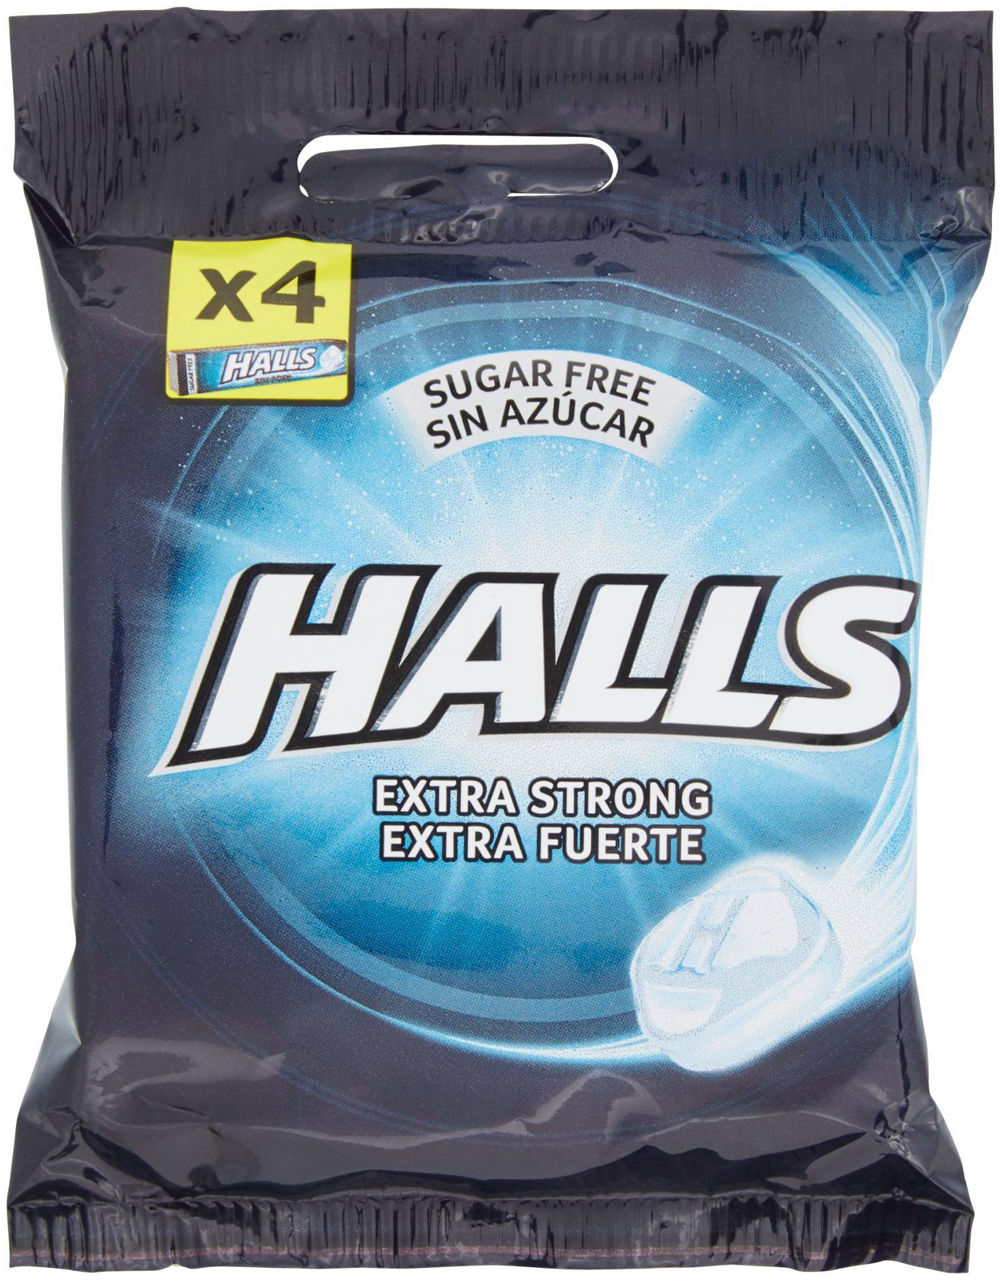 Caramelle Halls Extra Strong 4 x 32 g - 0